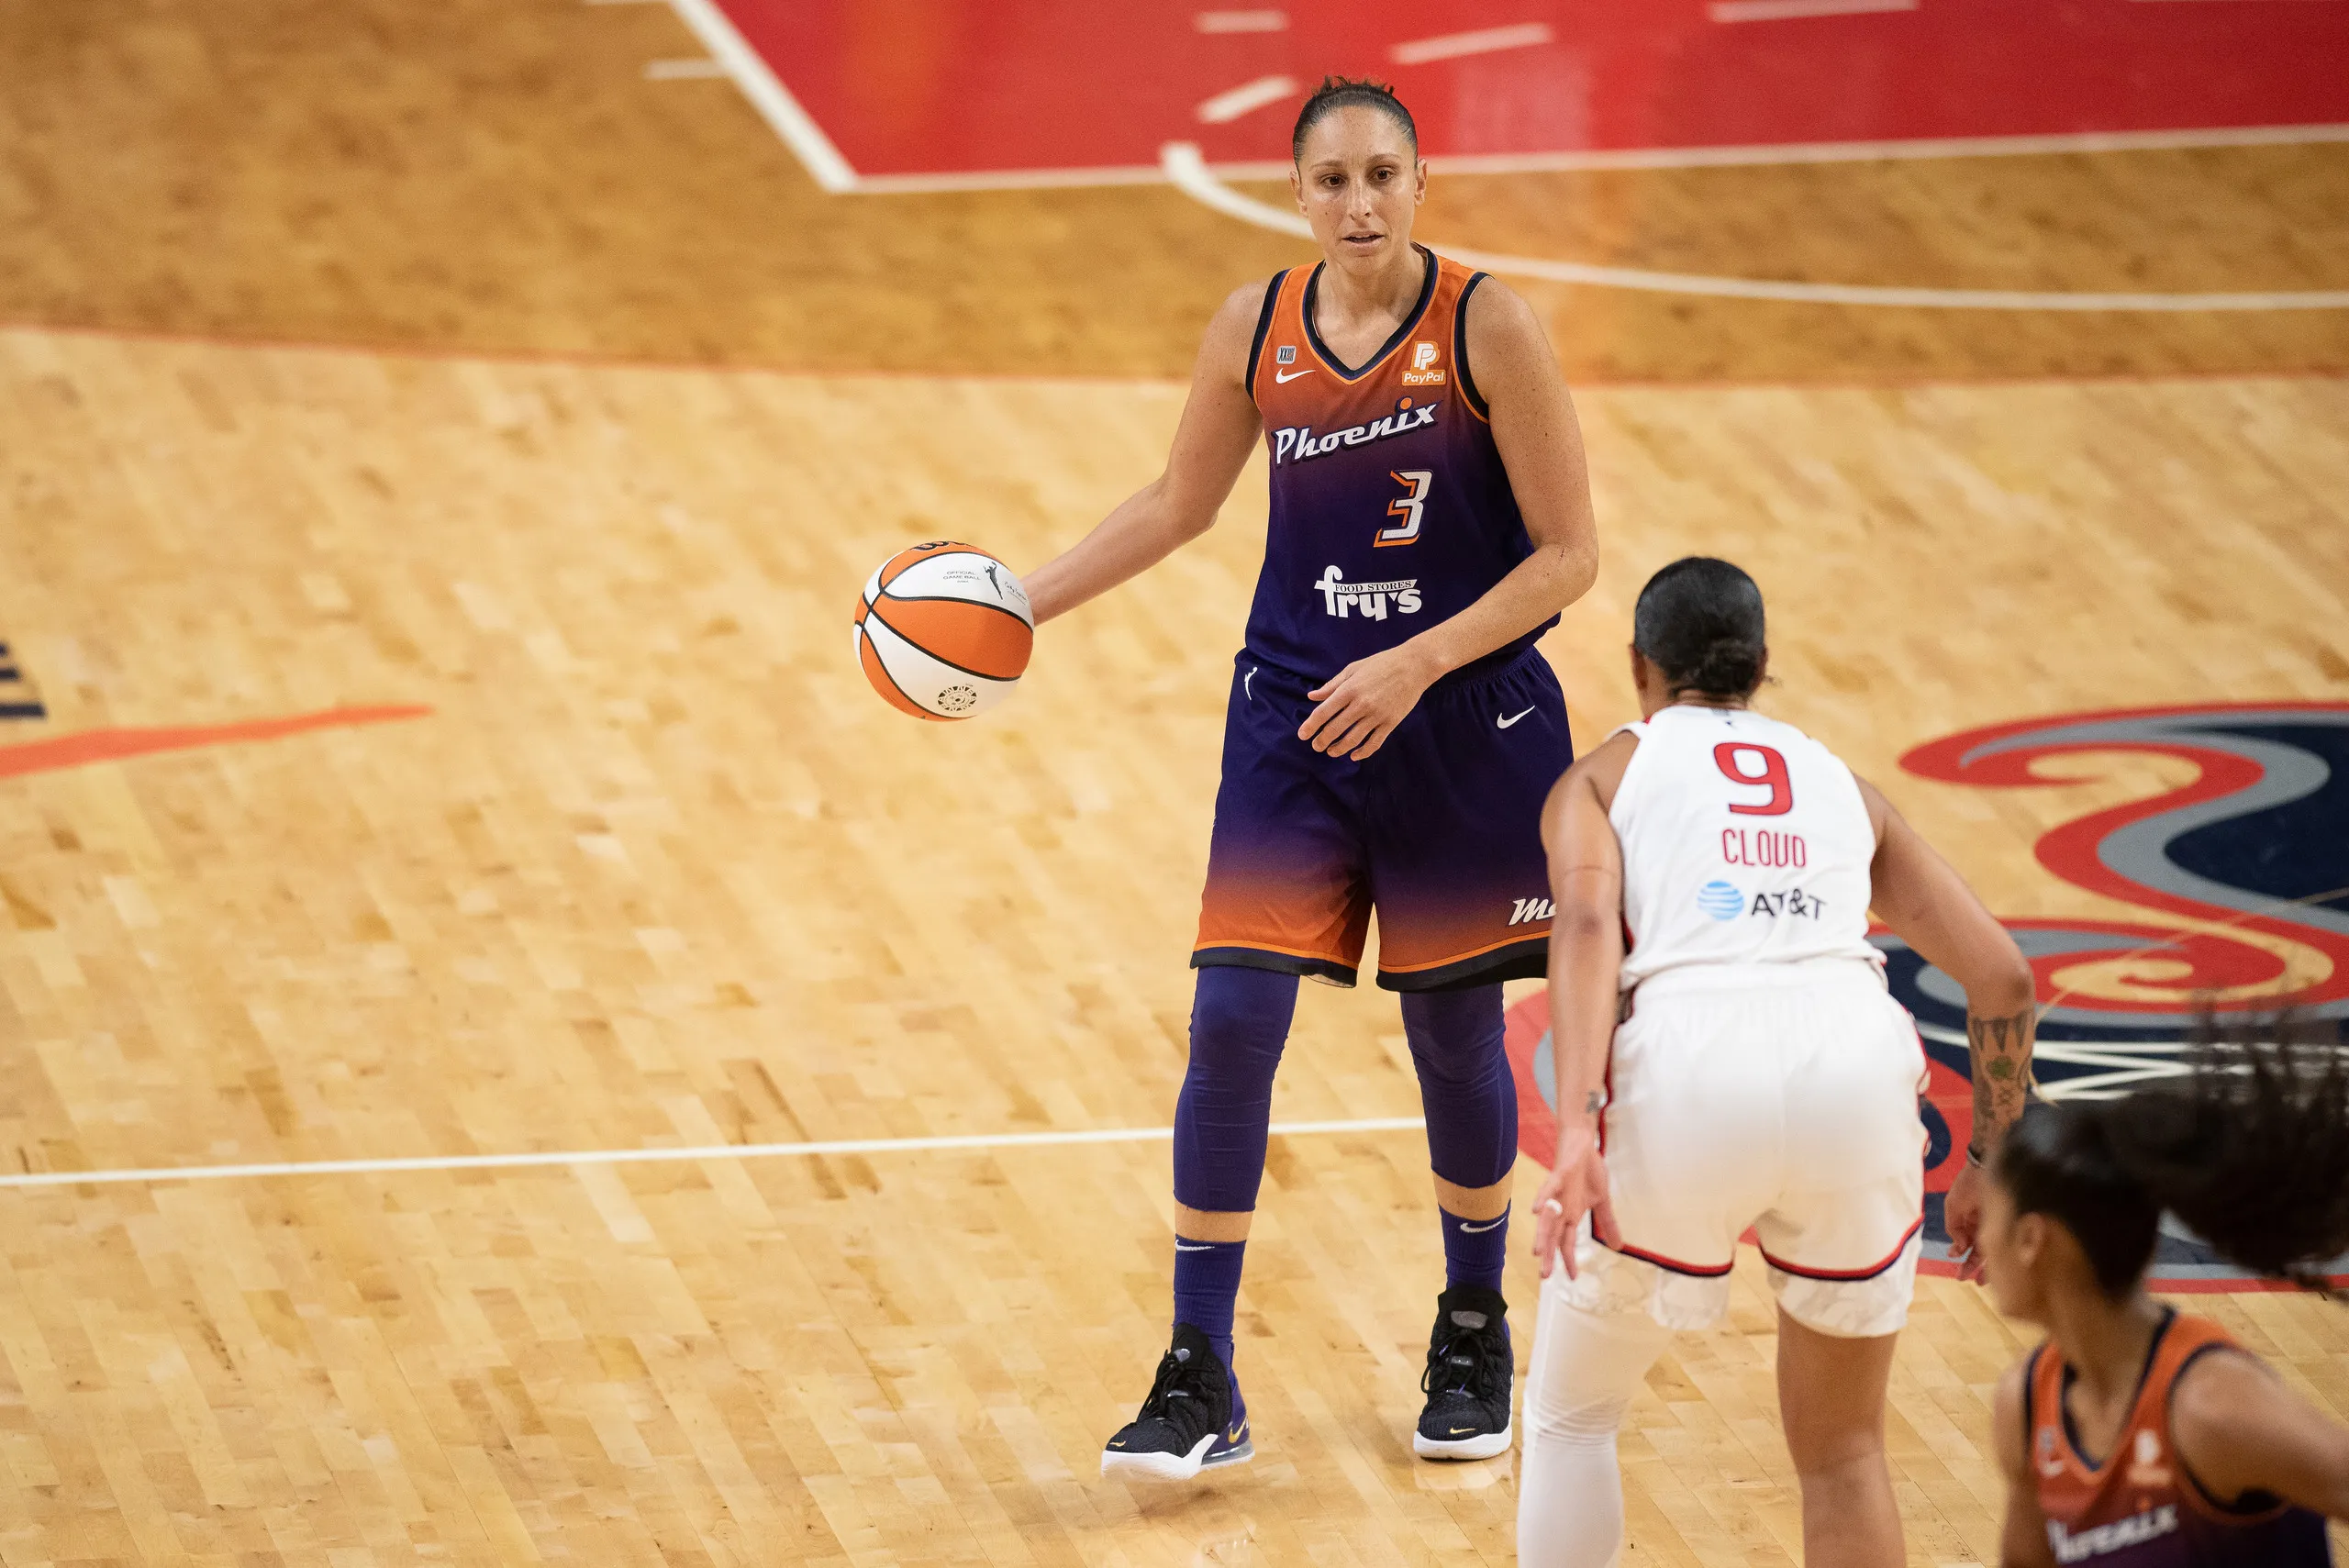 How many Olympic gold medals has Diana Taurasi won?